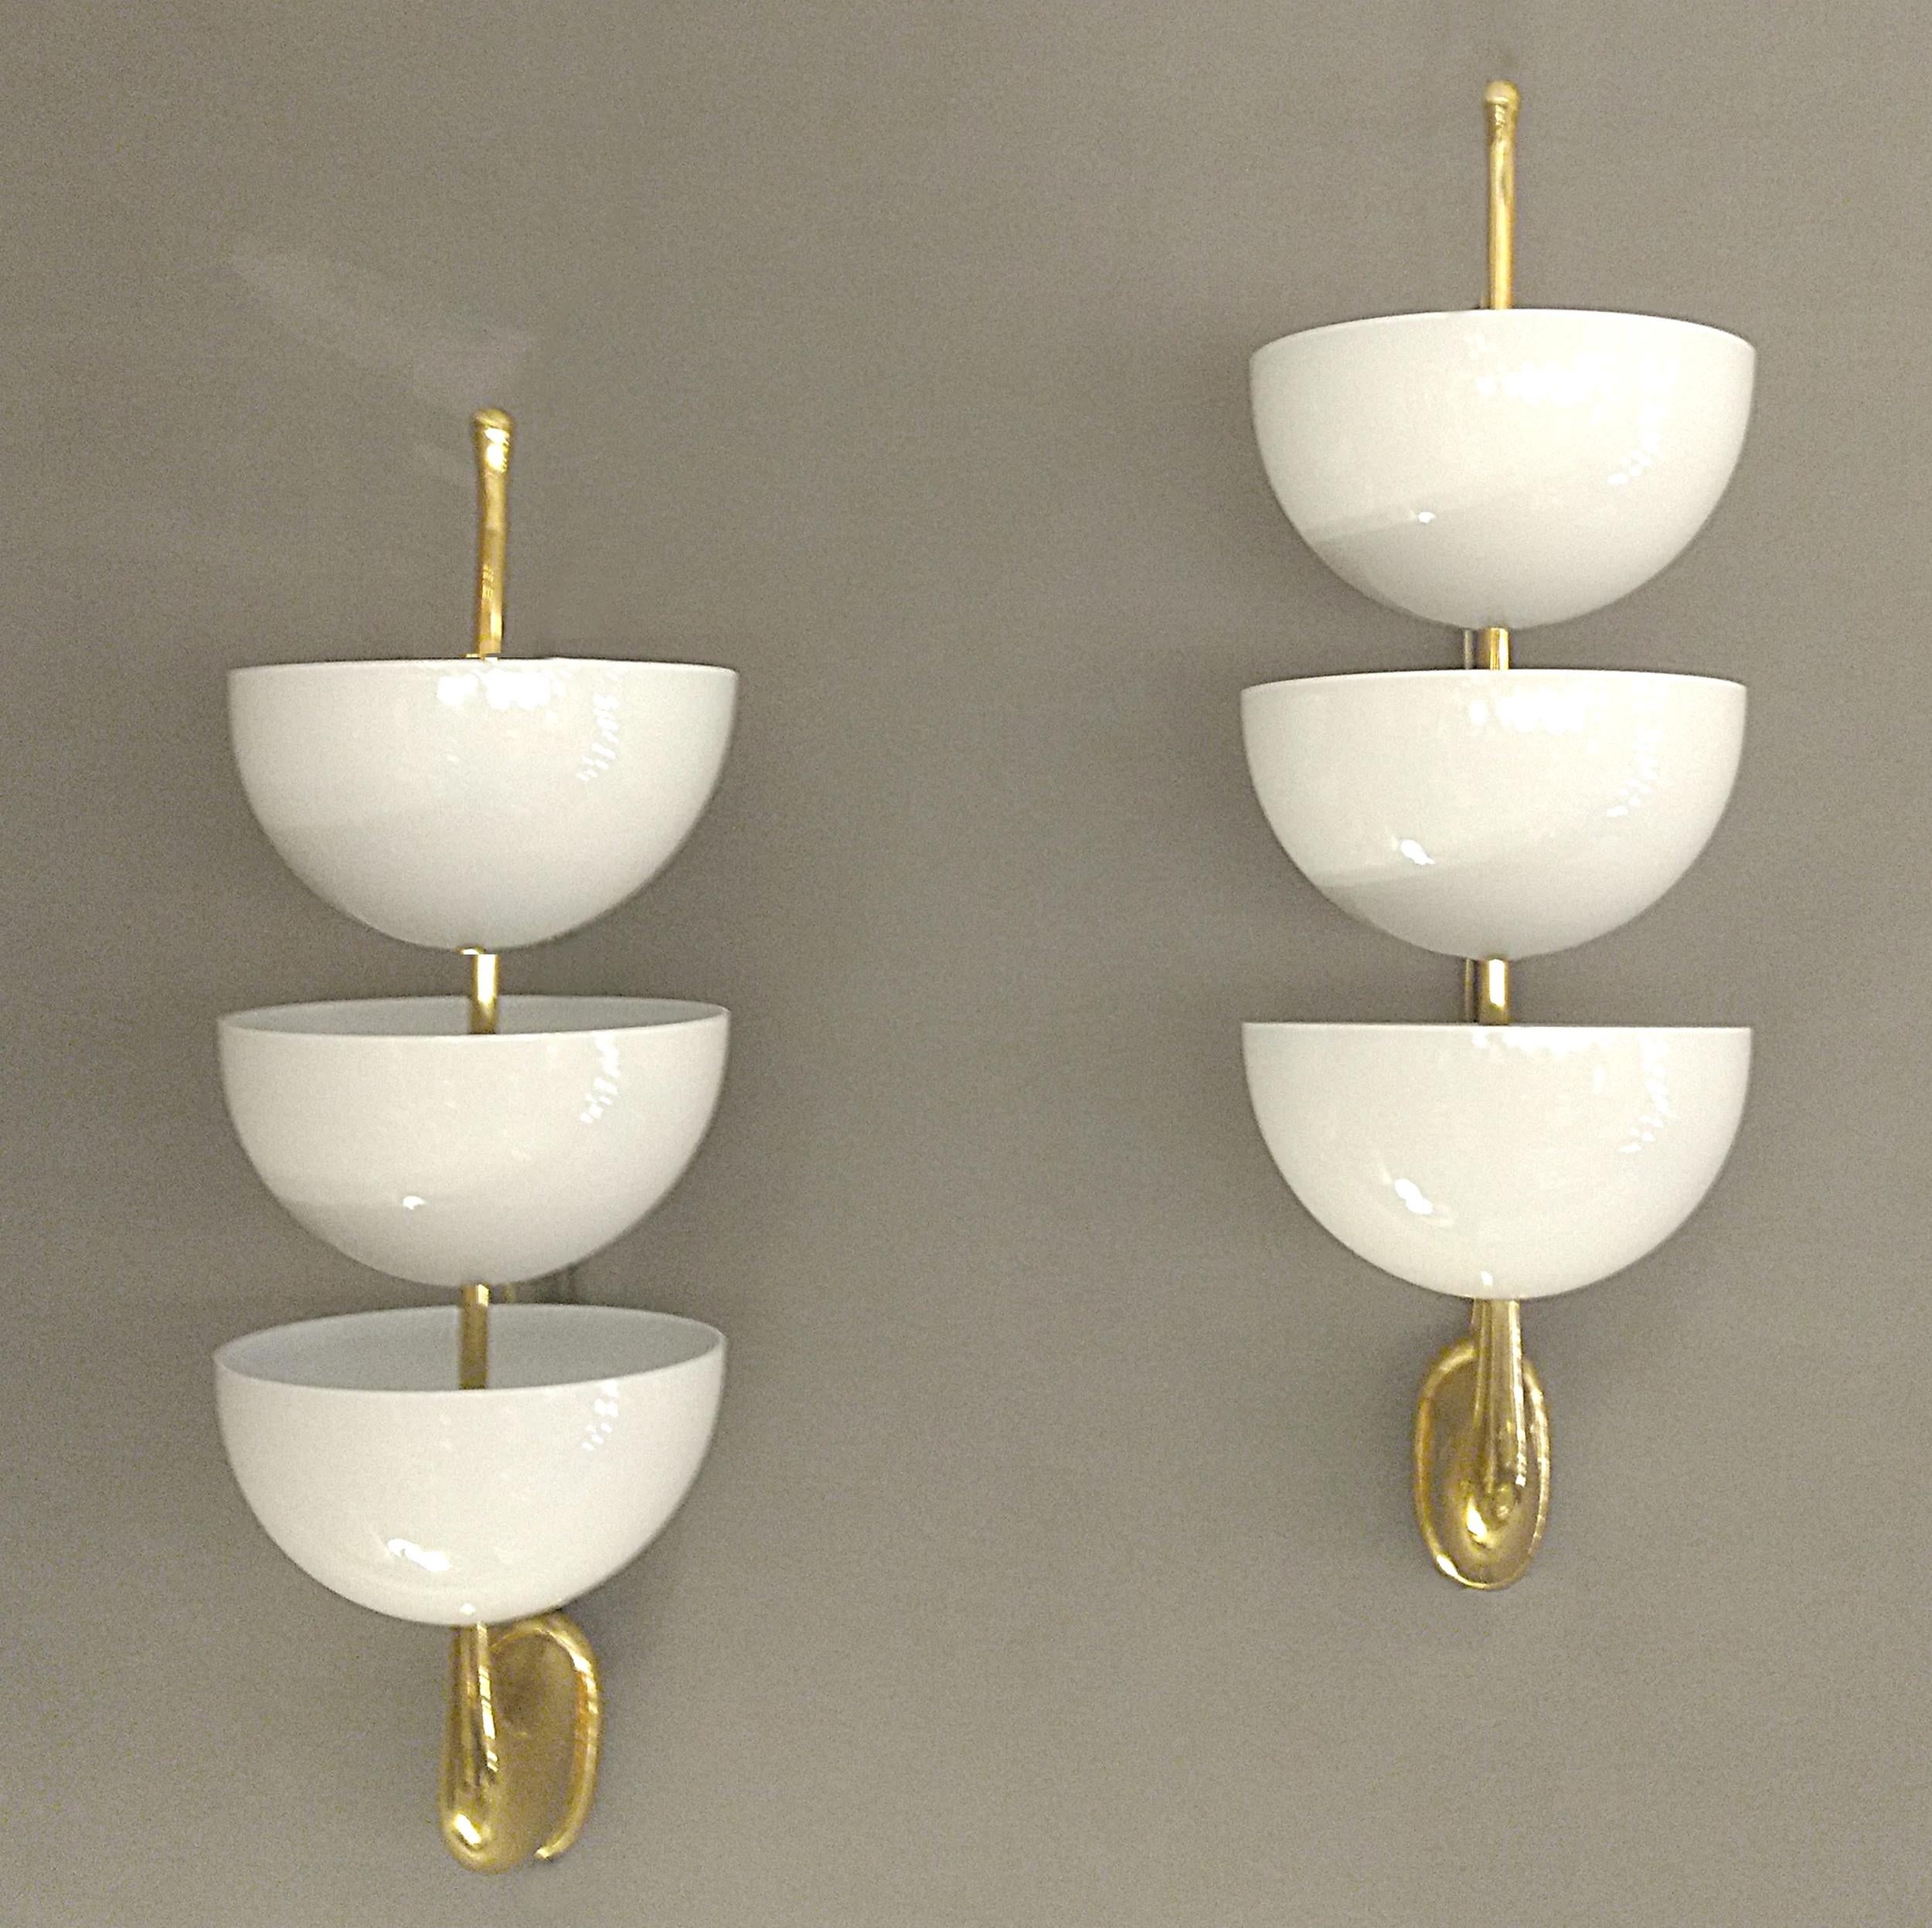 Pair of wall sconces in solid brass and lacquered sheet metal, Italy circa 1960.
Three deep round cups, cream lacquered on the outside and white on the inside, each conceal an electric bulb. They are mounted on an upward-facing brass arm, ending in